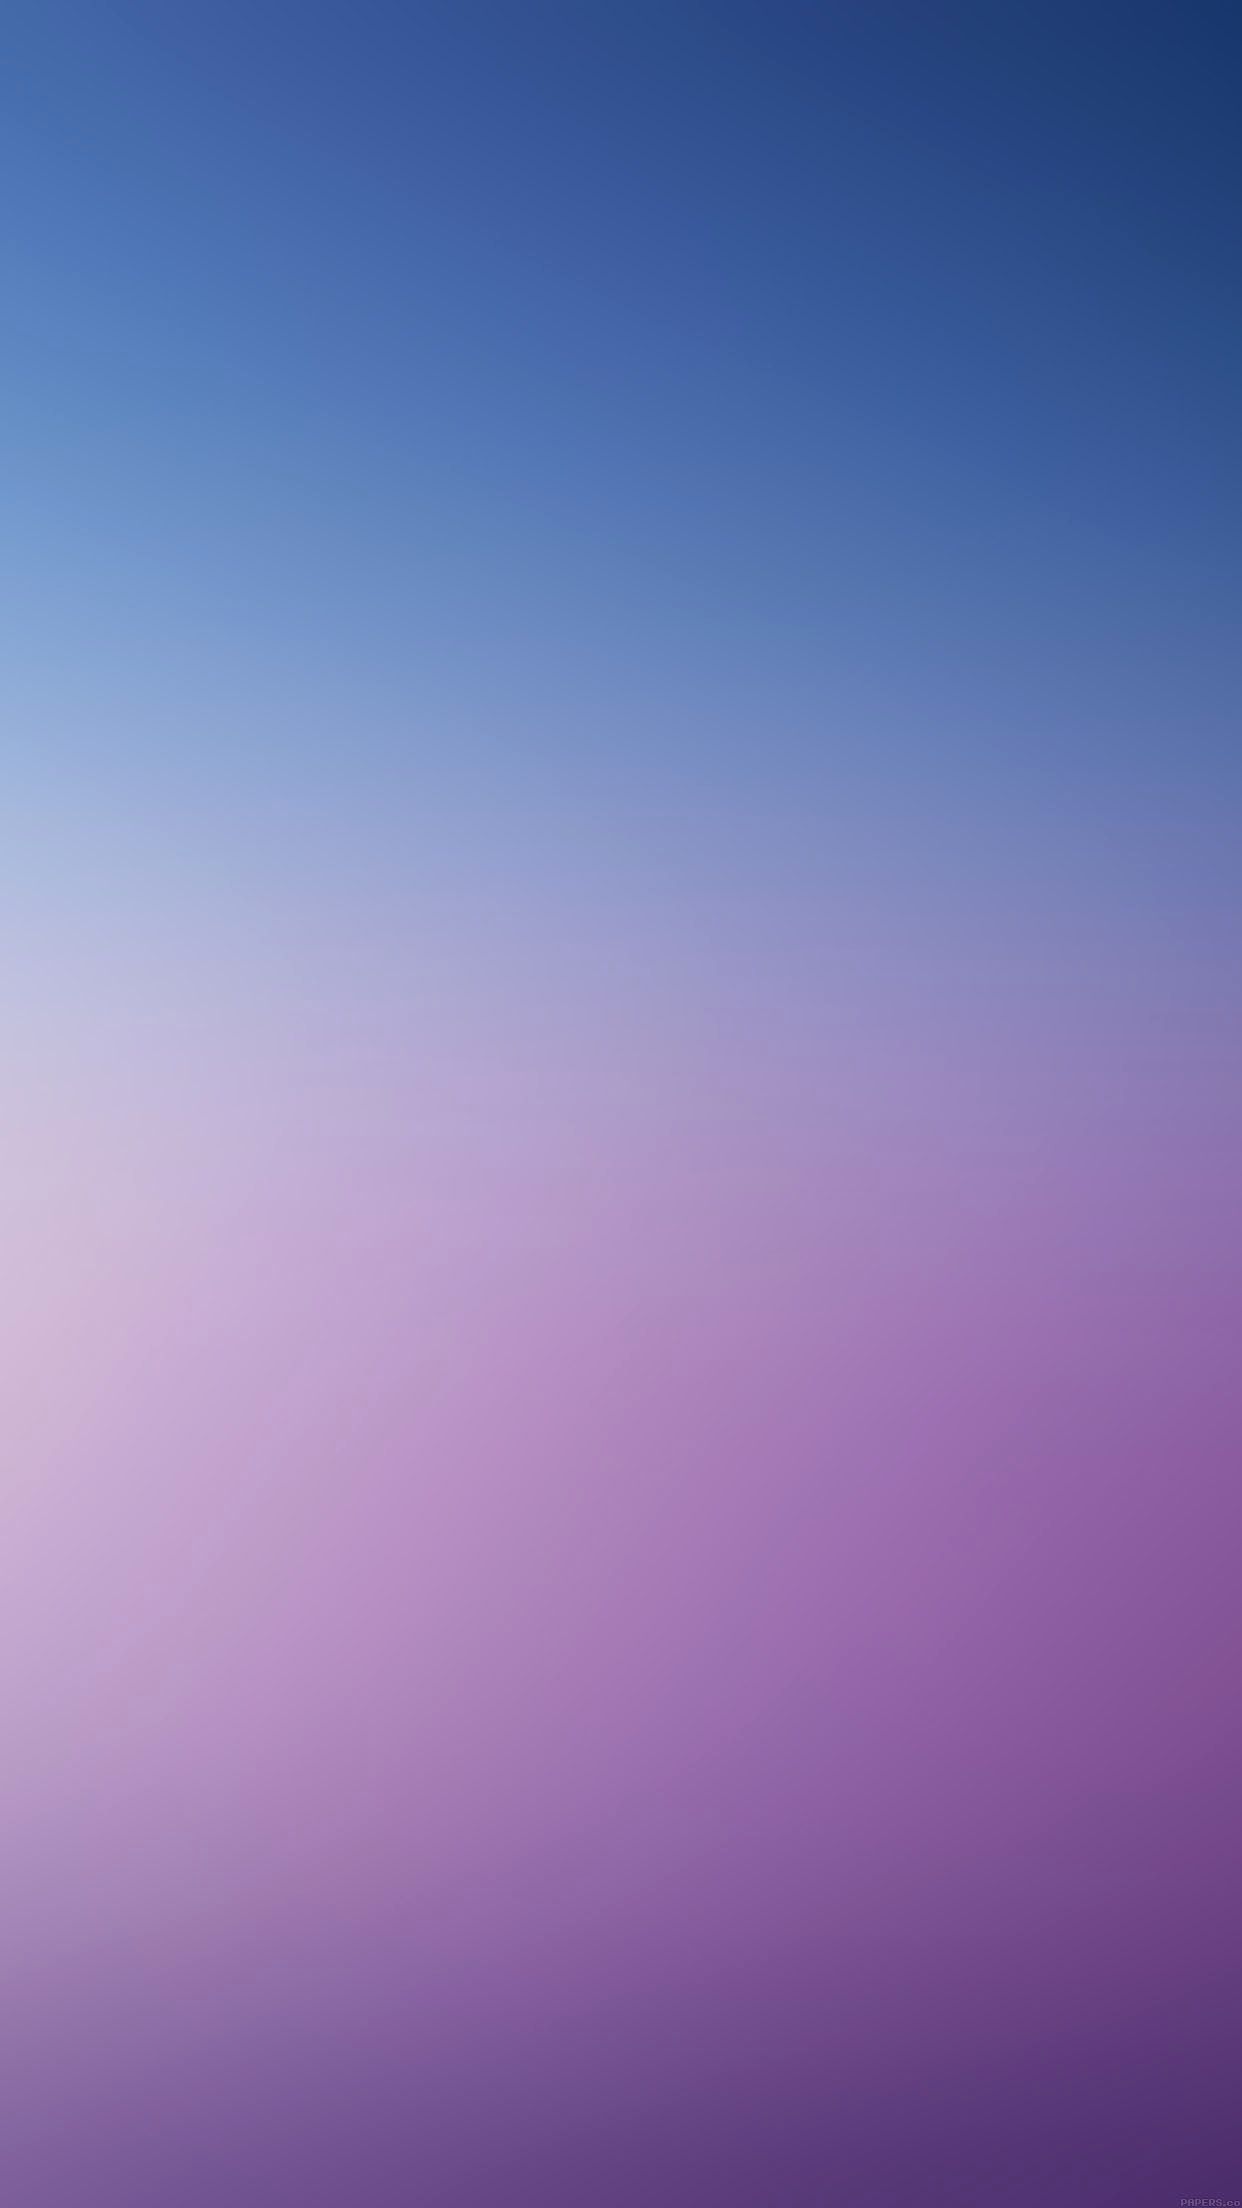 Pink And Purple Ombre Wallpapers